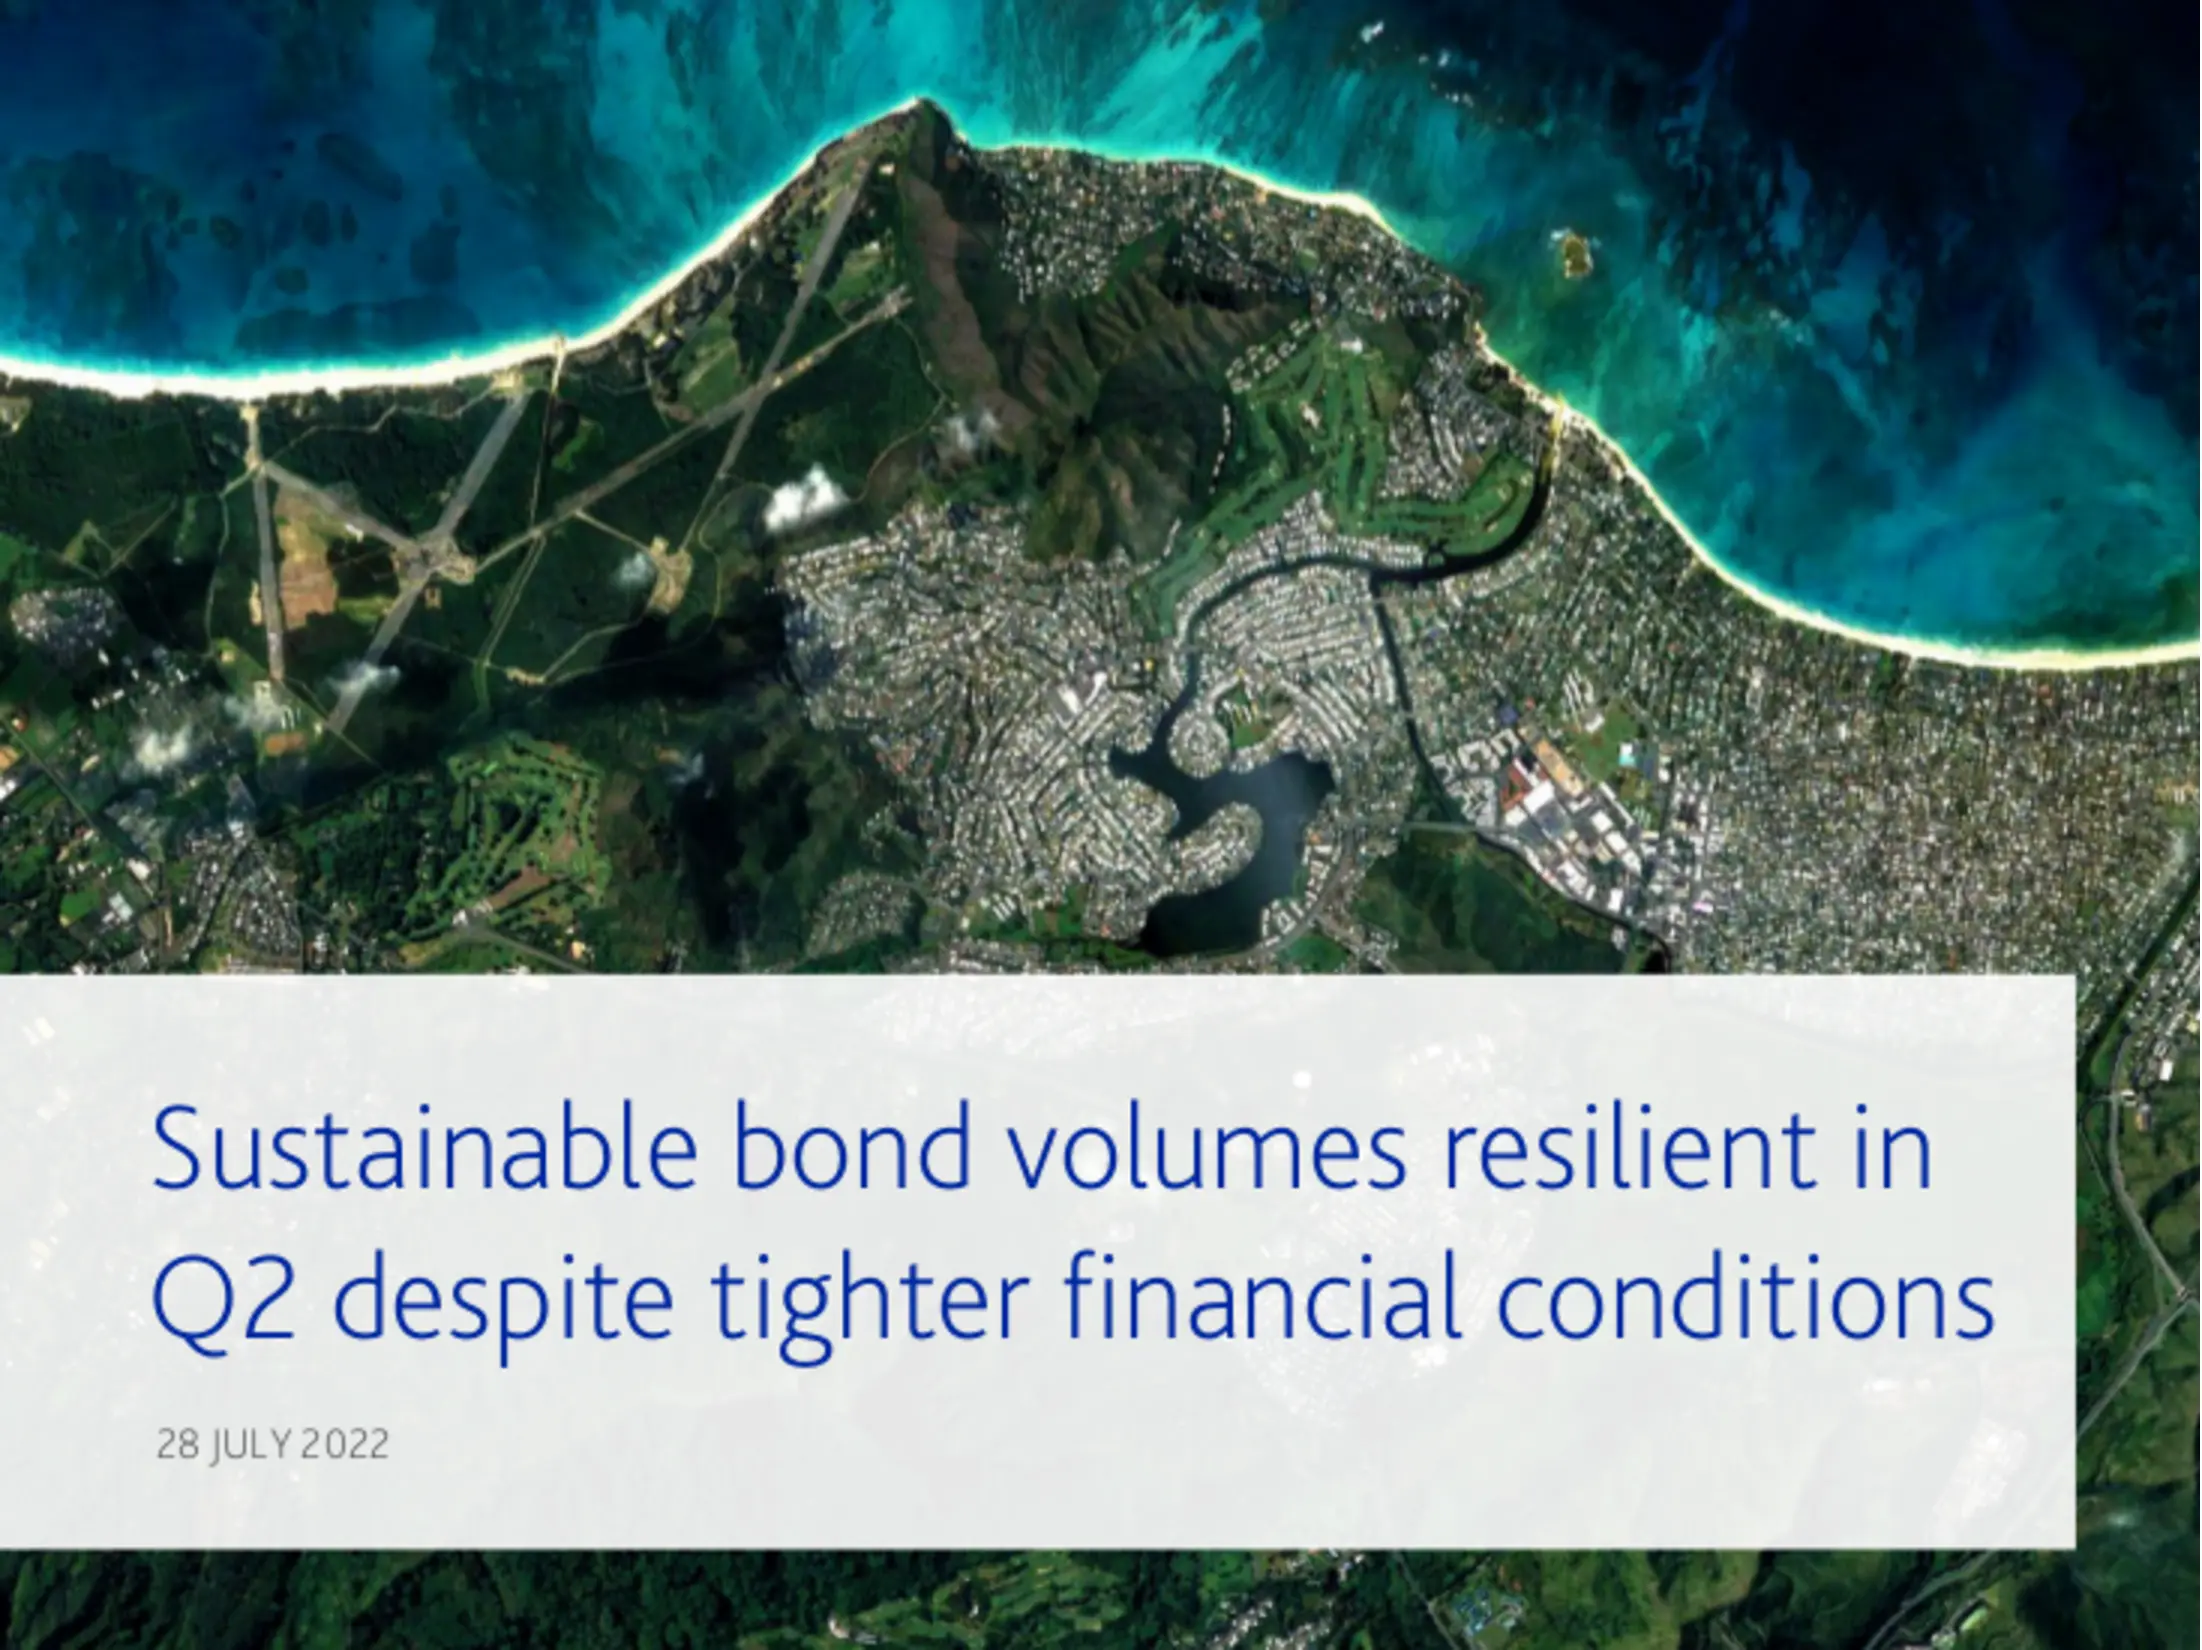 Sustainable bond volumes resilient in Q2 despite tighter financial conditions